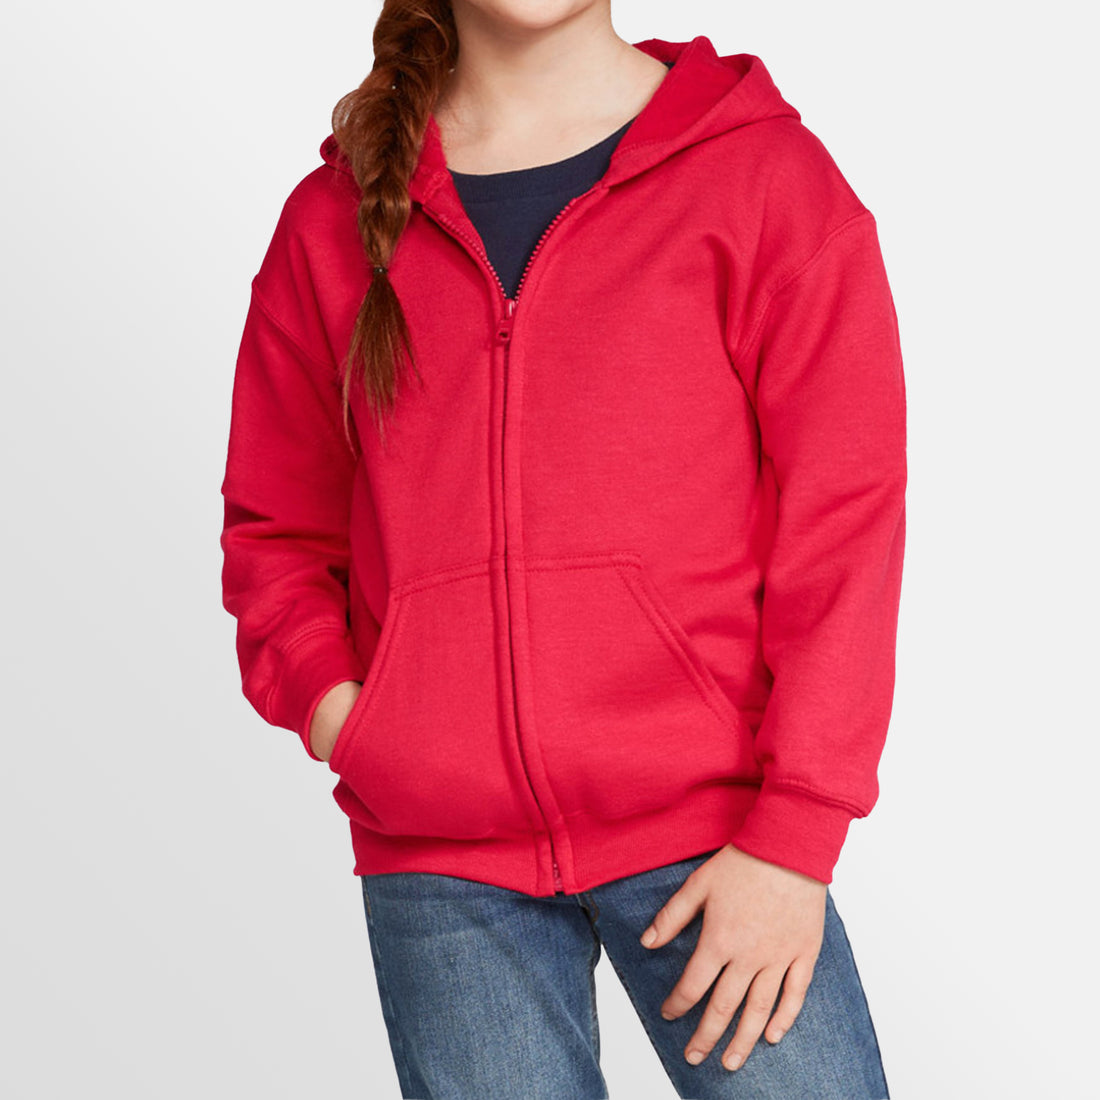 Youth Zip Hoodie – On Request